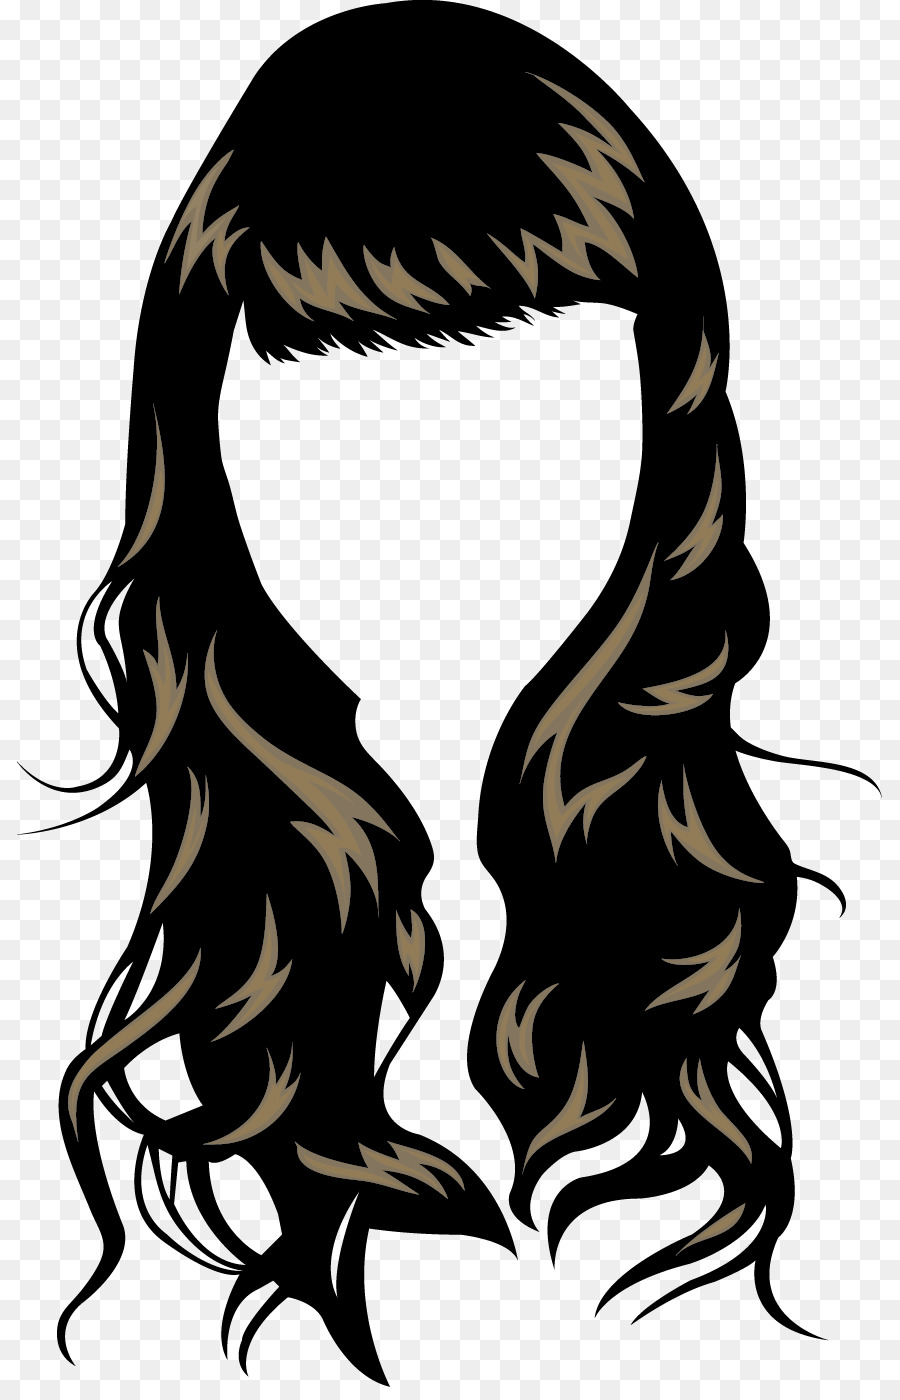 Hairstyle - Vector Ms. Hair png download - 865*1387 - Free Transparent Hairstyle png Download.